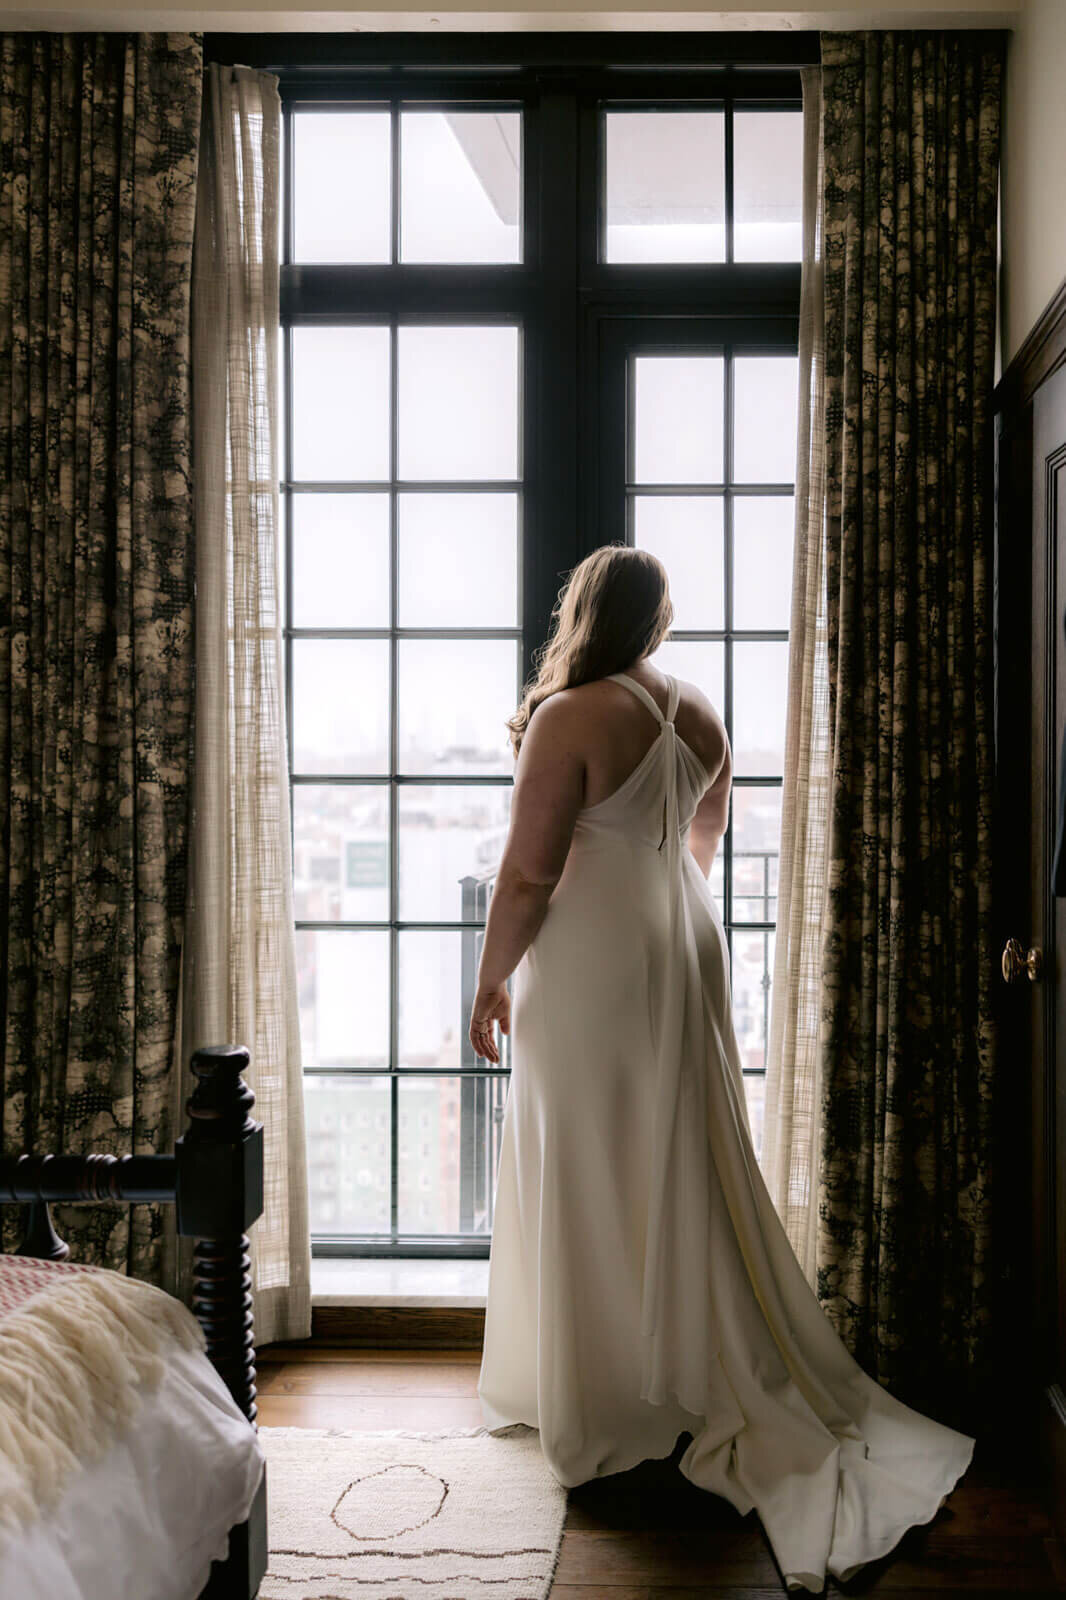 Back view of the bride looking out the huge window in a Ludlow Hotel room.